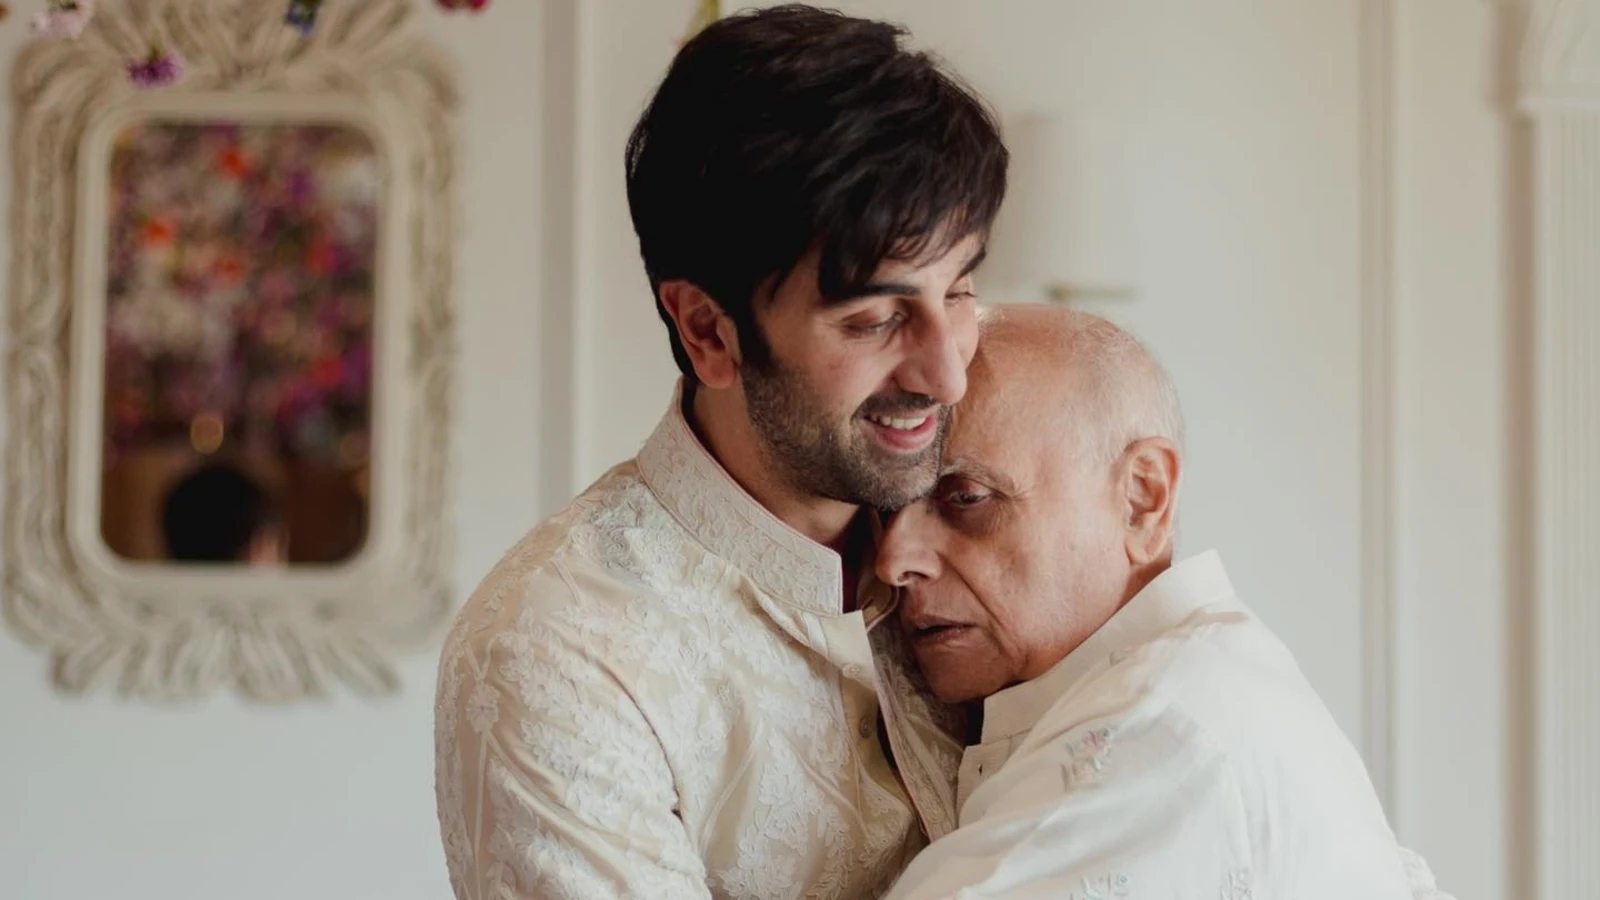 Ranbir Kapoor hugs emotional father-in-law Mahesh Bhatt in new pics from wedding day. See here